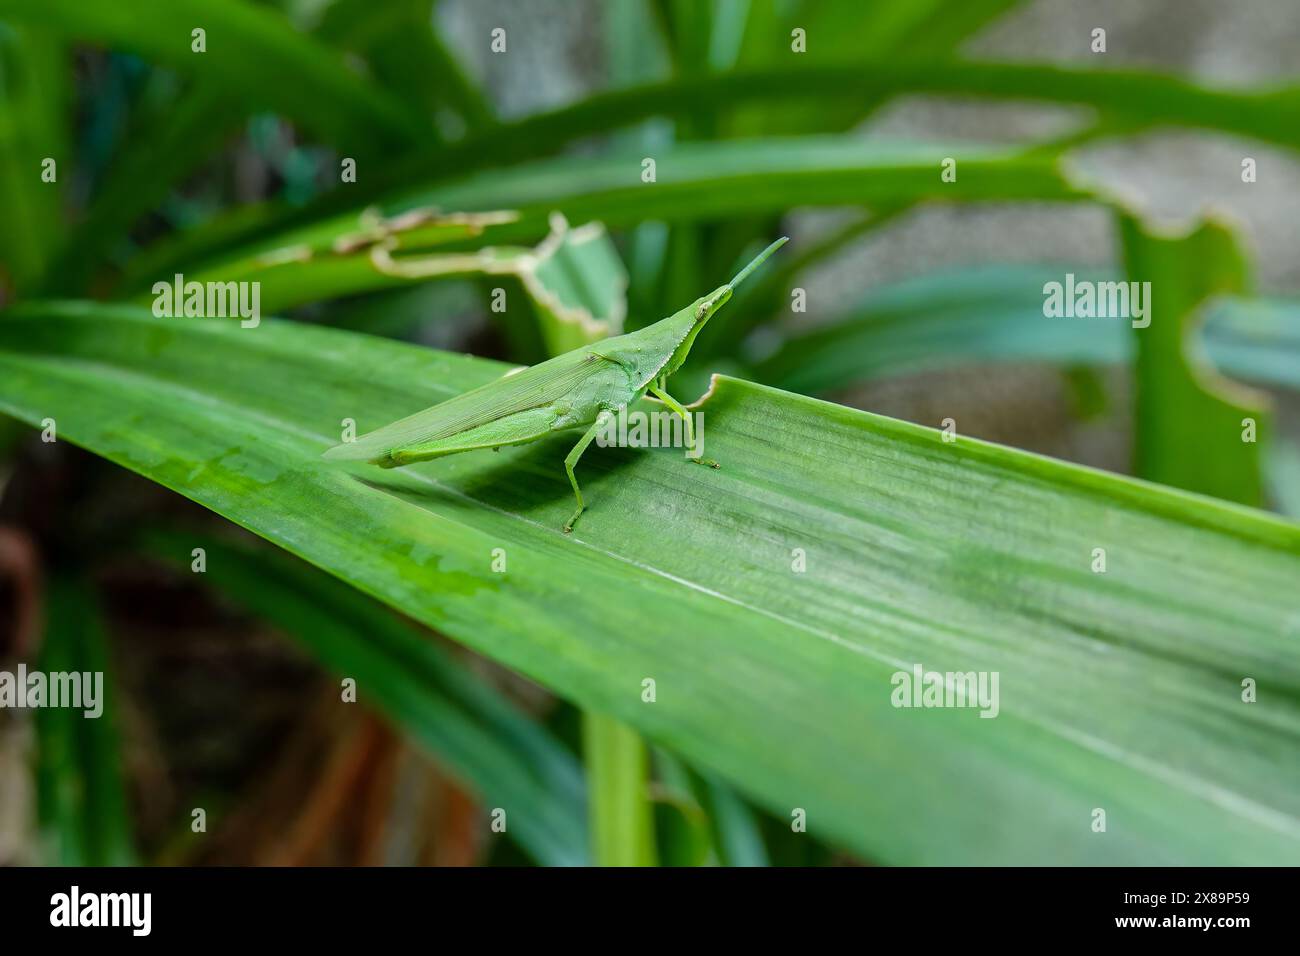 Discover the Subtle Elegance of Nature: The Long-headed Toothpick Grasshopper. Stock Photo